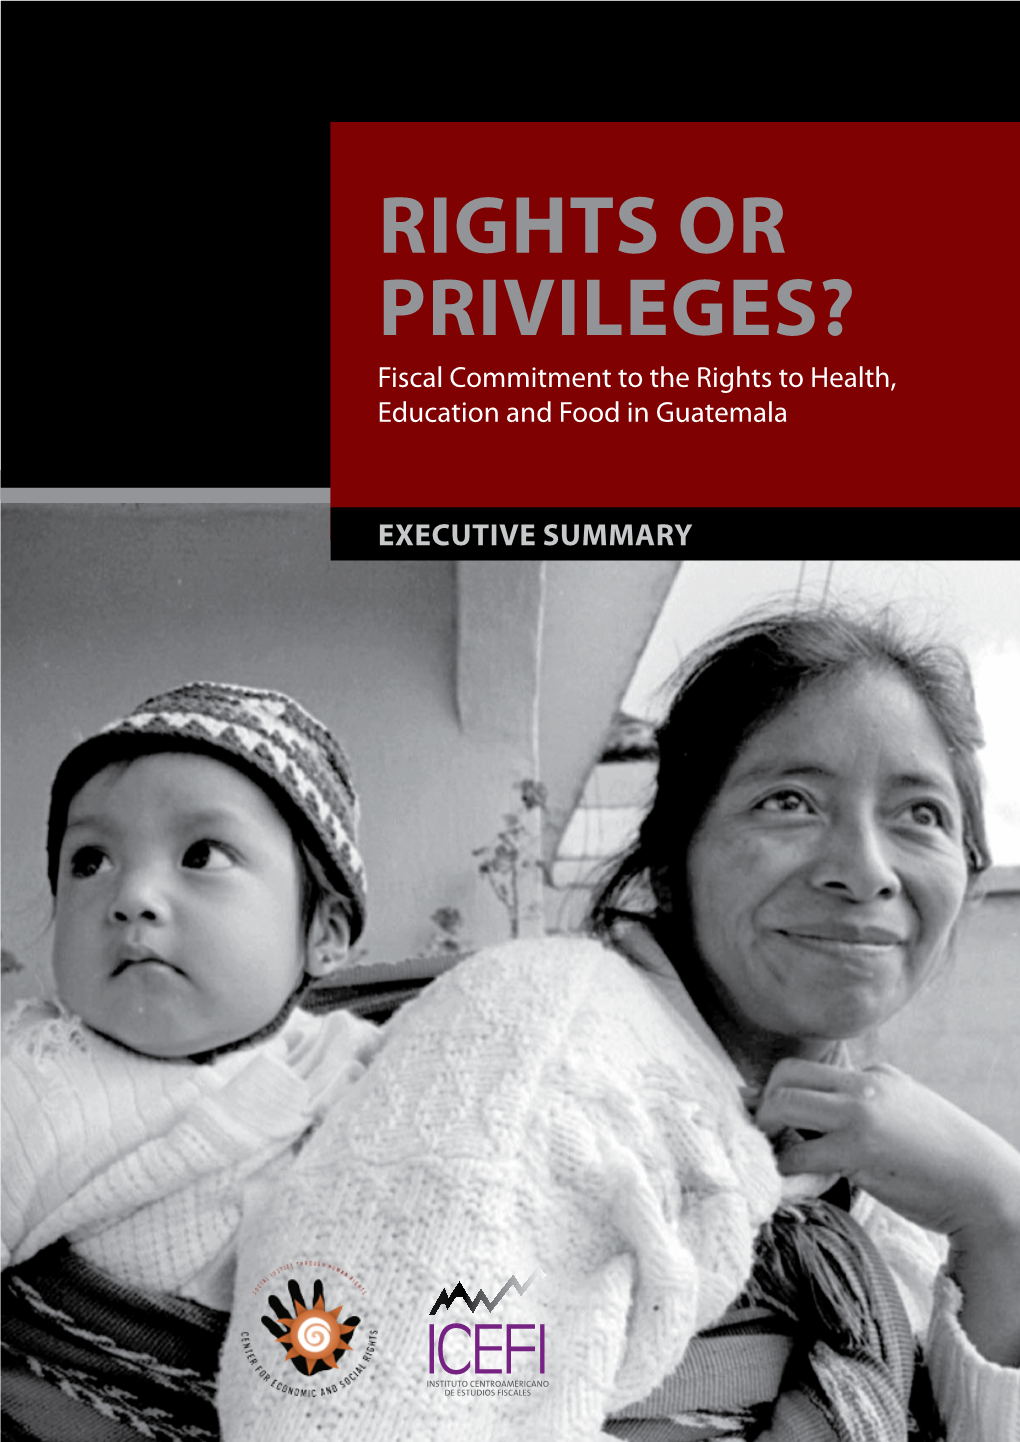 Rights Or Privileges? Fiscal Commitment to the Rights to Health, Education and Food in Guatemala